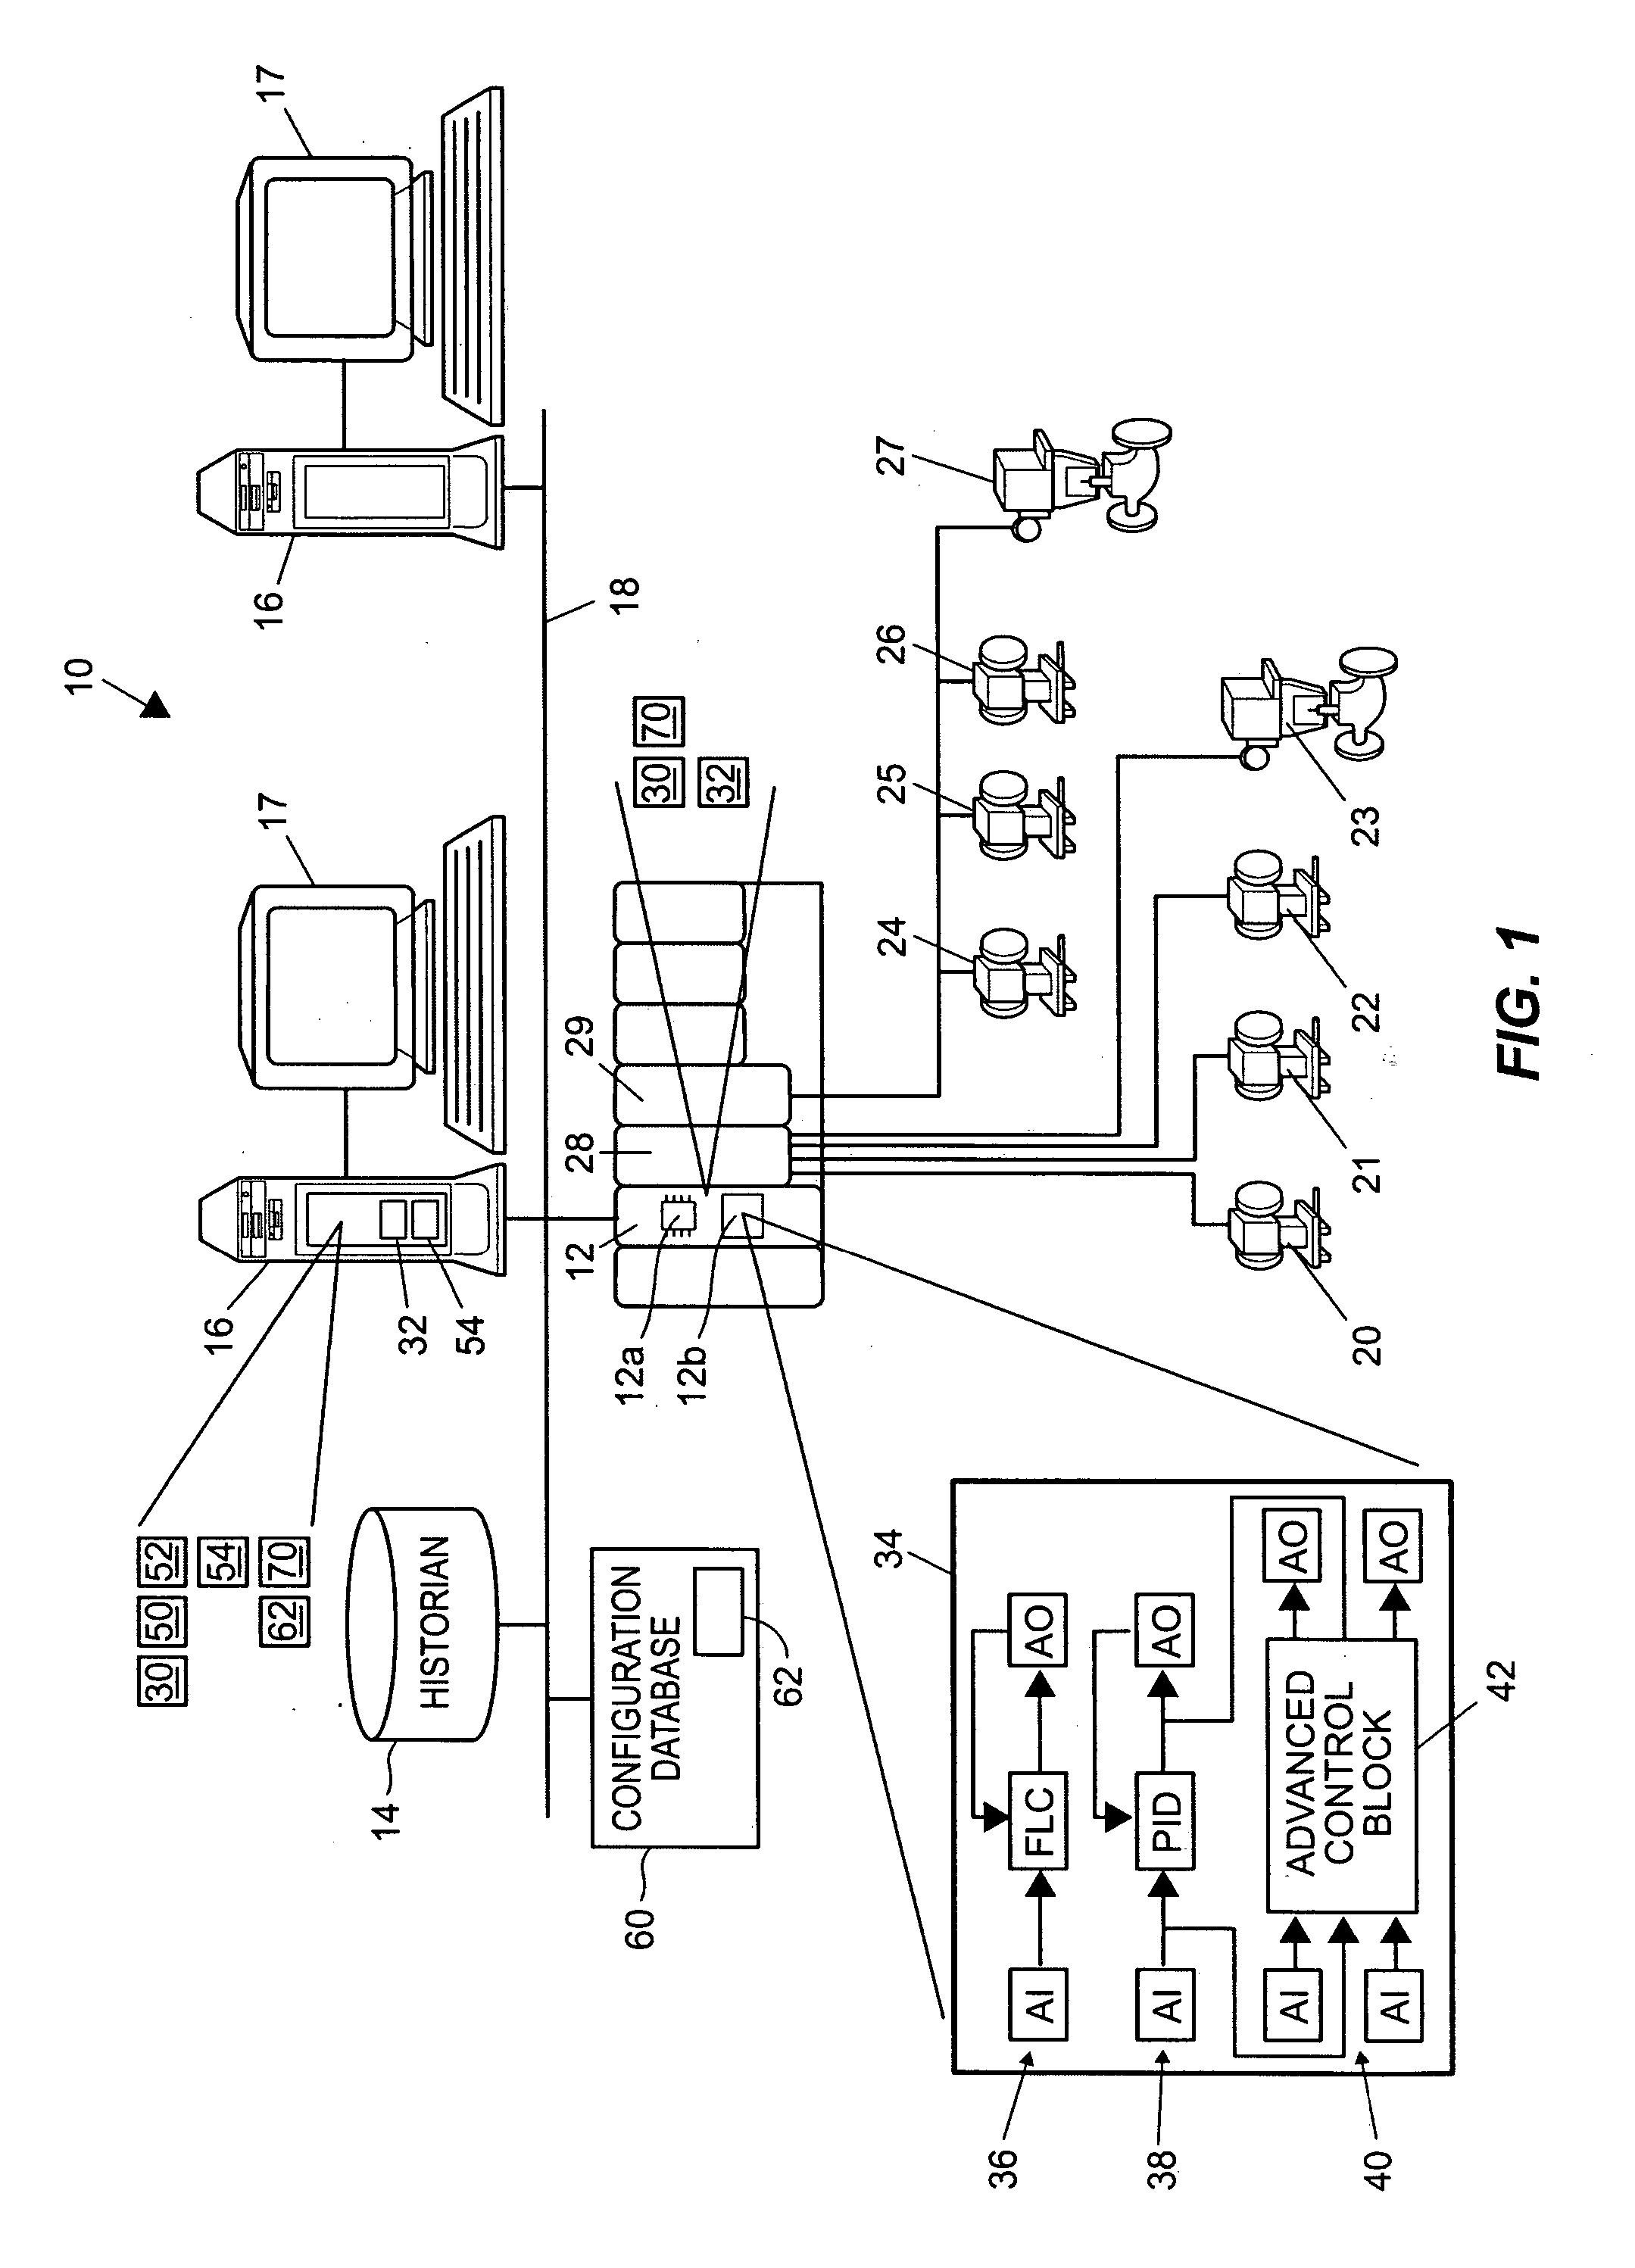 Method and system for controlling a batch process